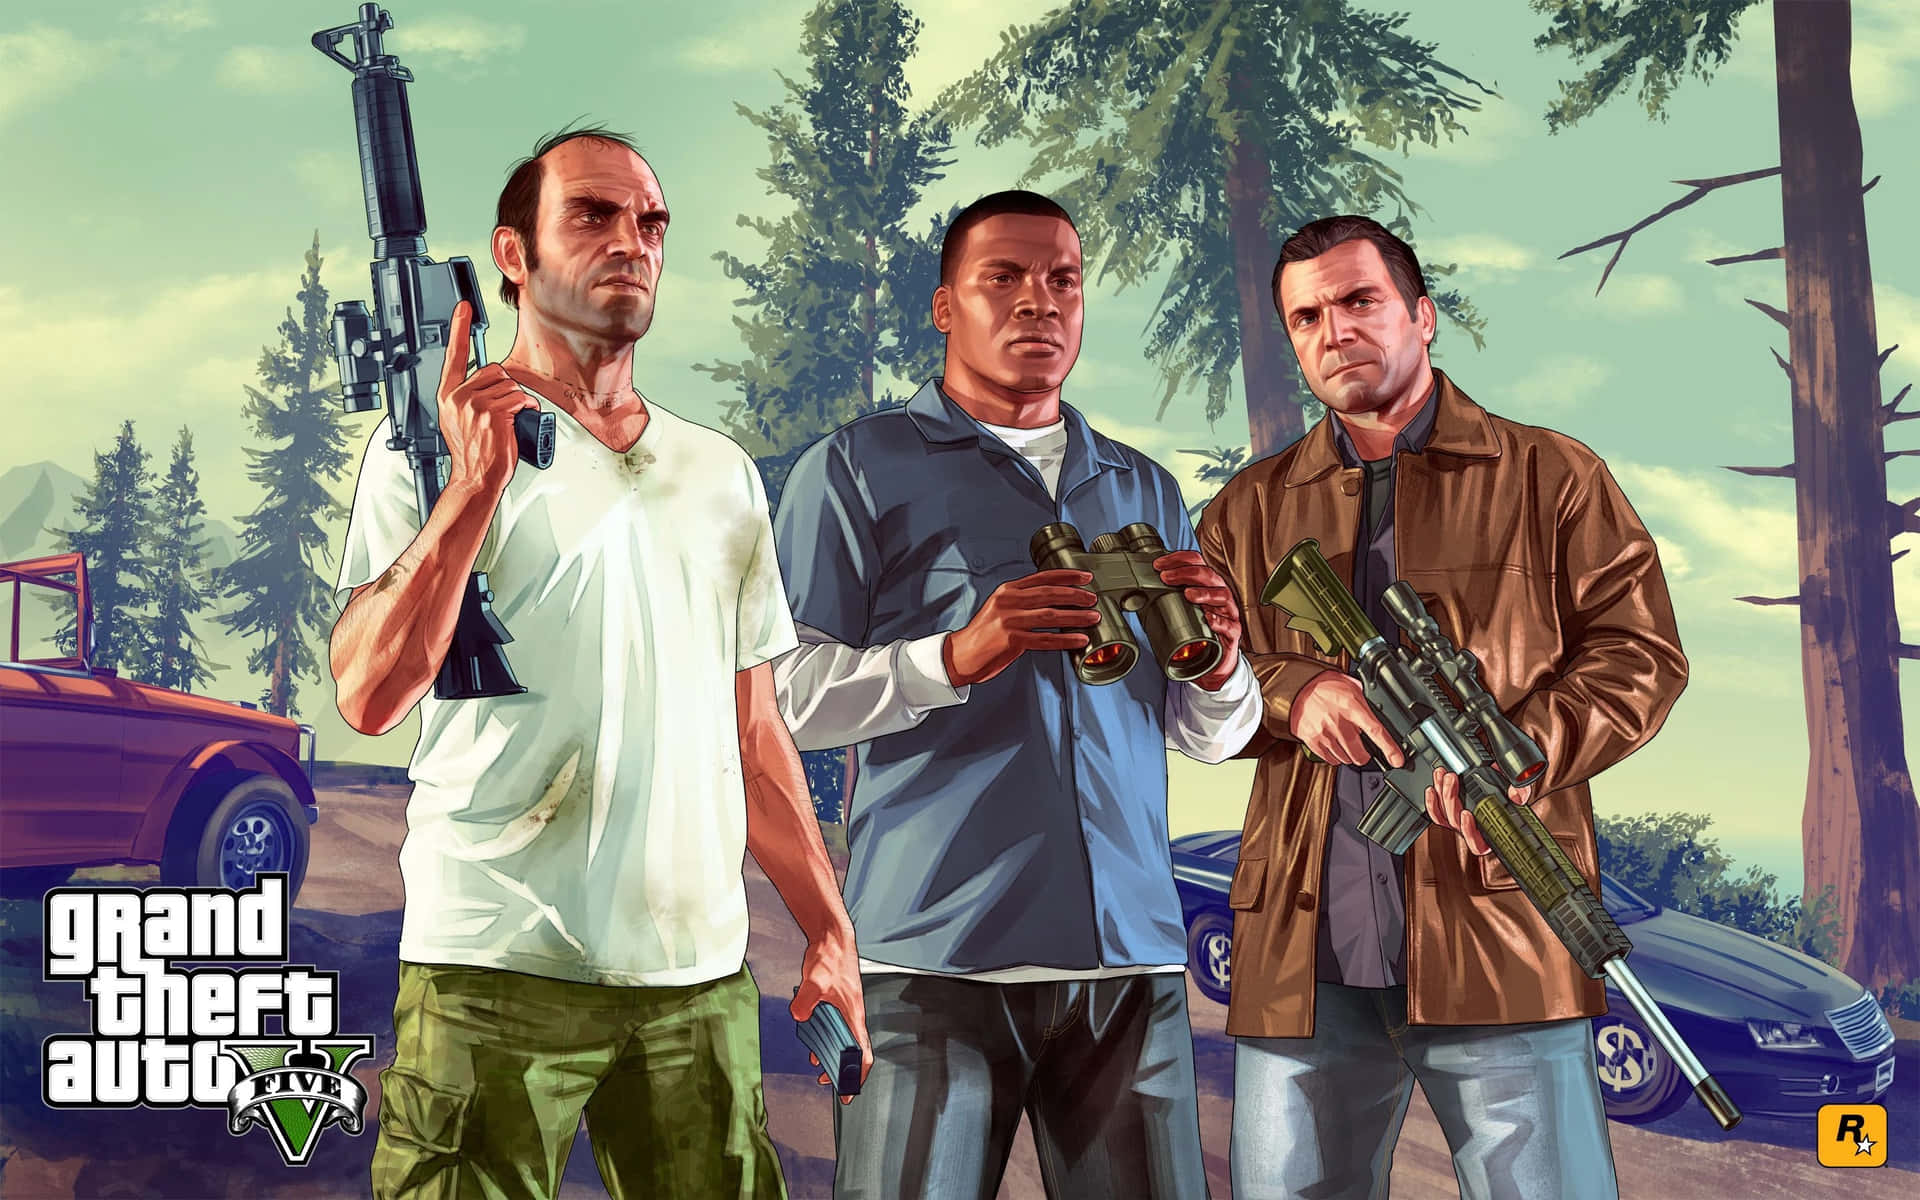 Live the Thrilling High Life of Grand Theft Auto V